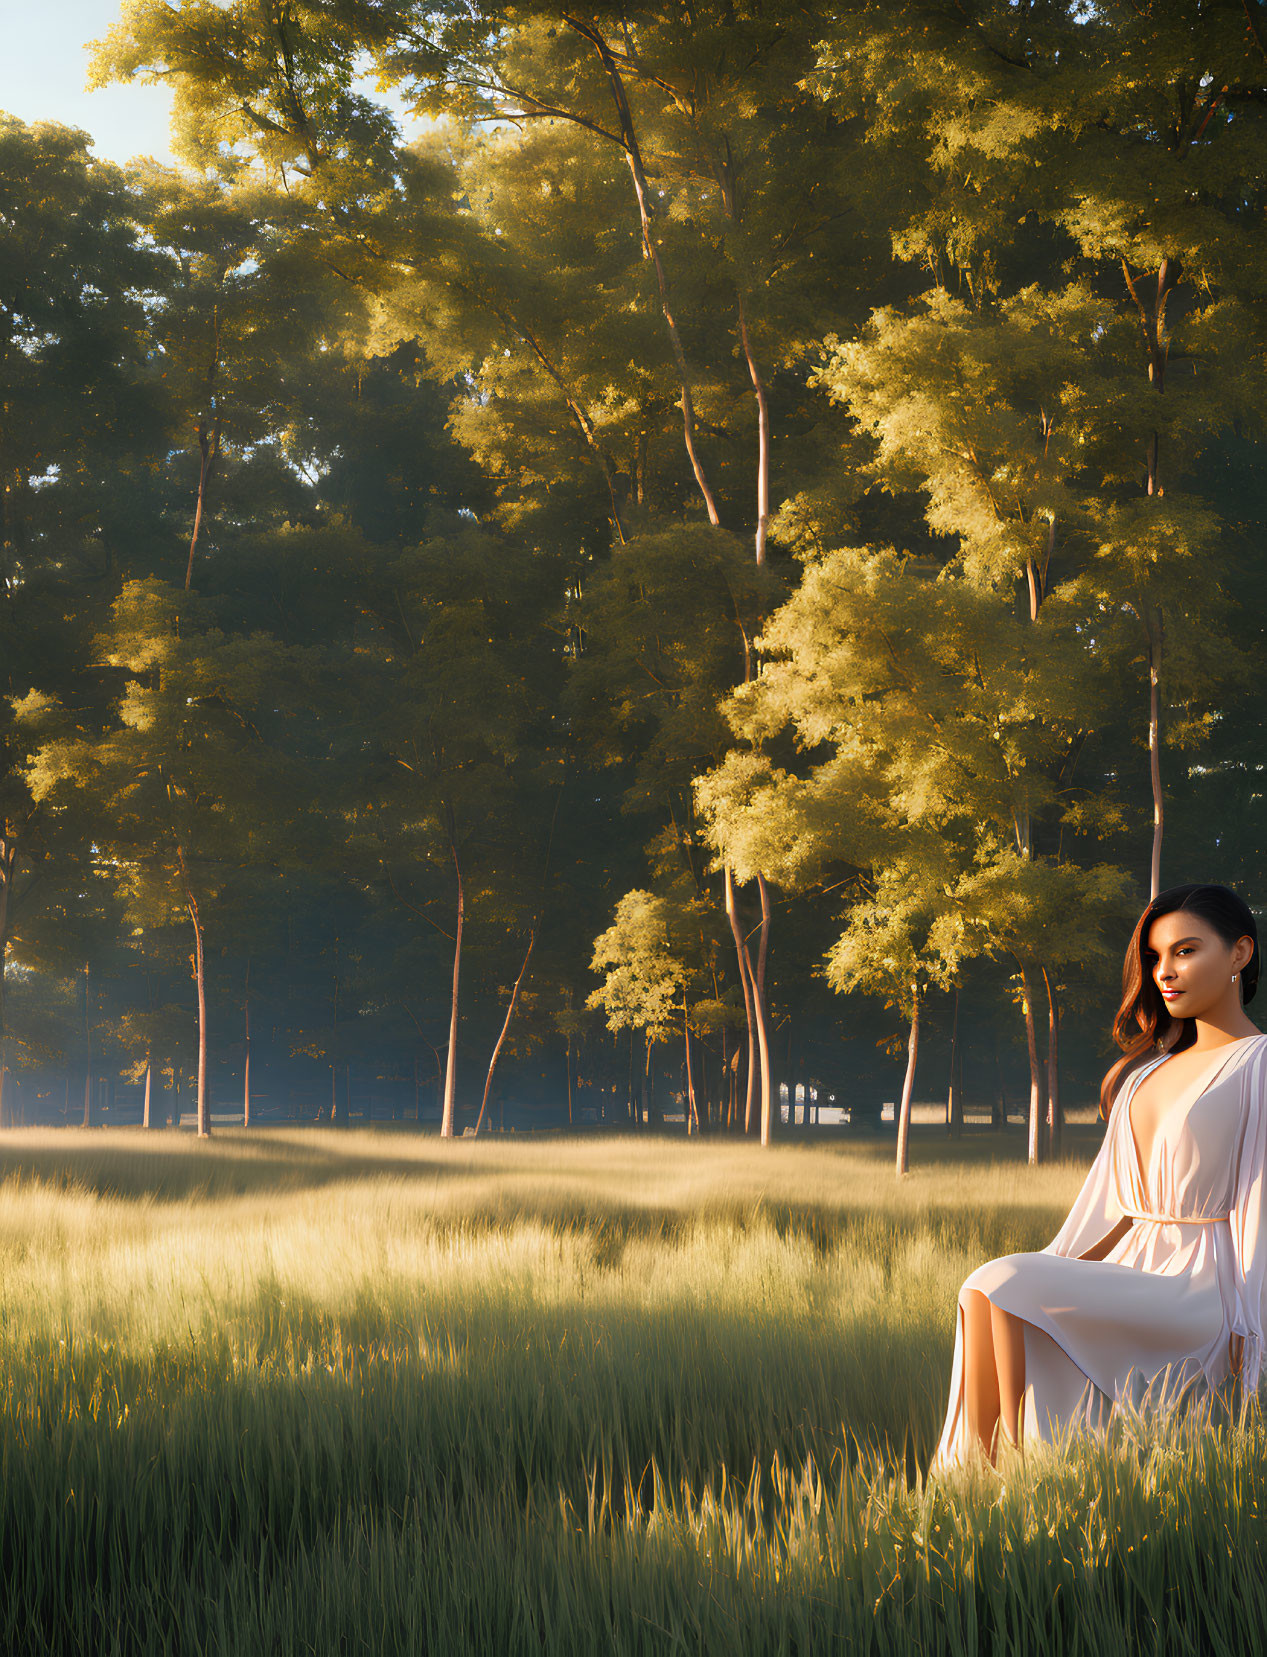 Woman sitting in sunlit field surrounded by tall trees